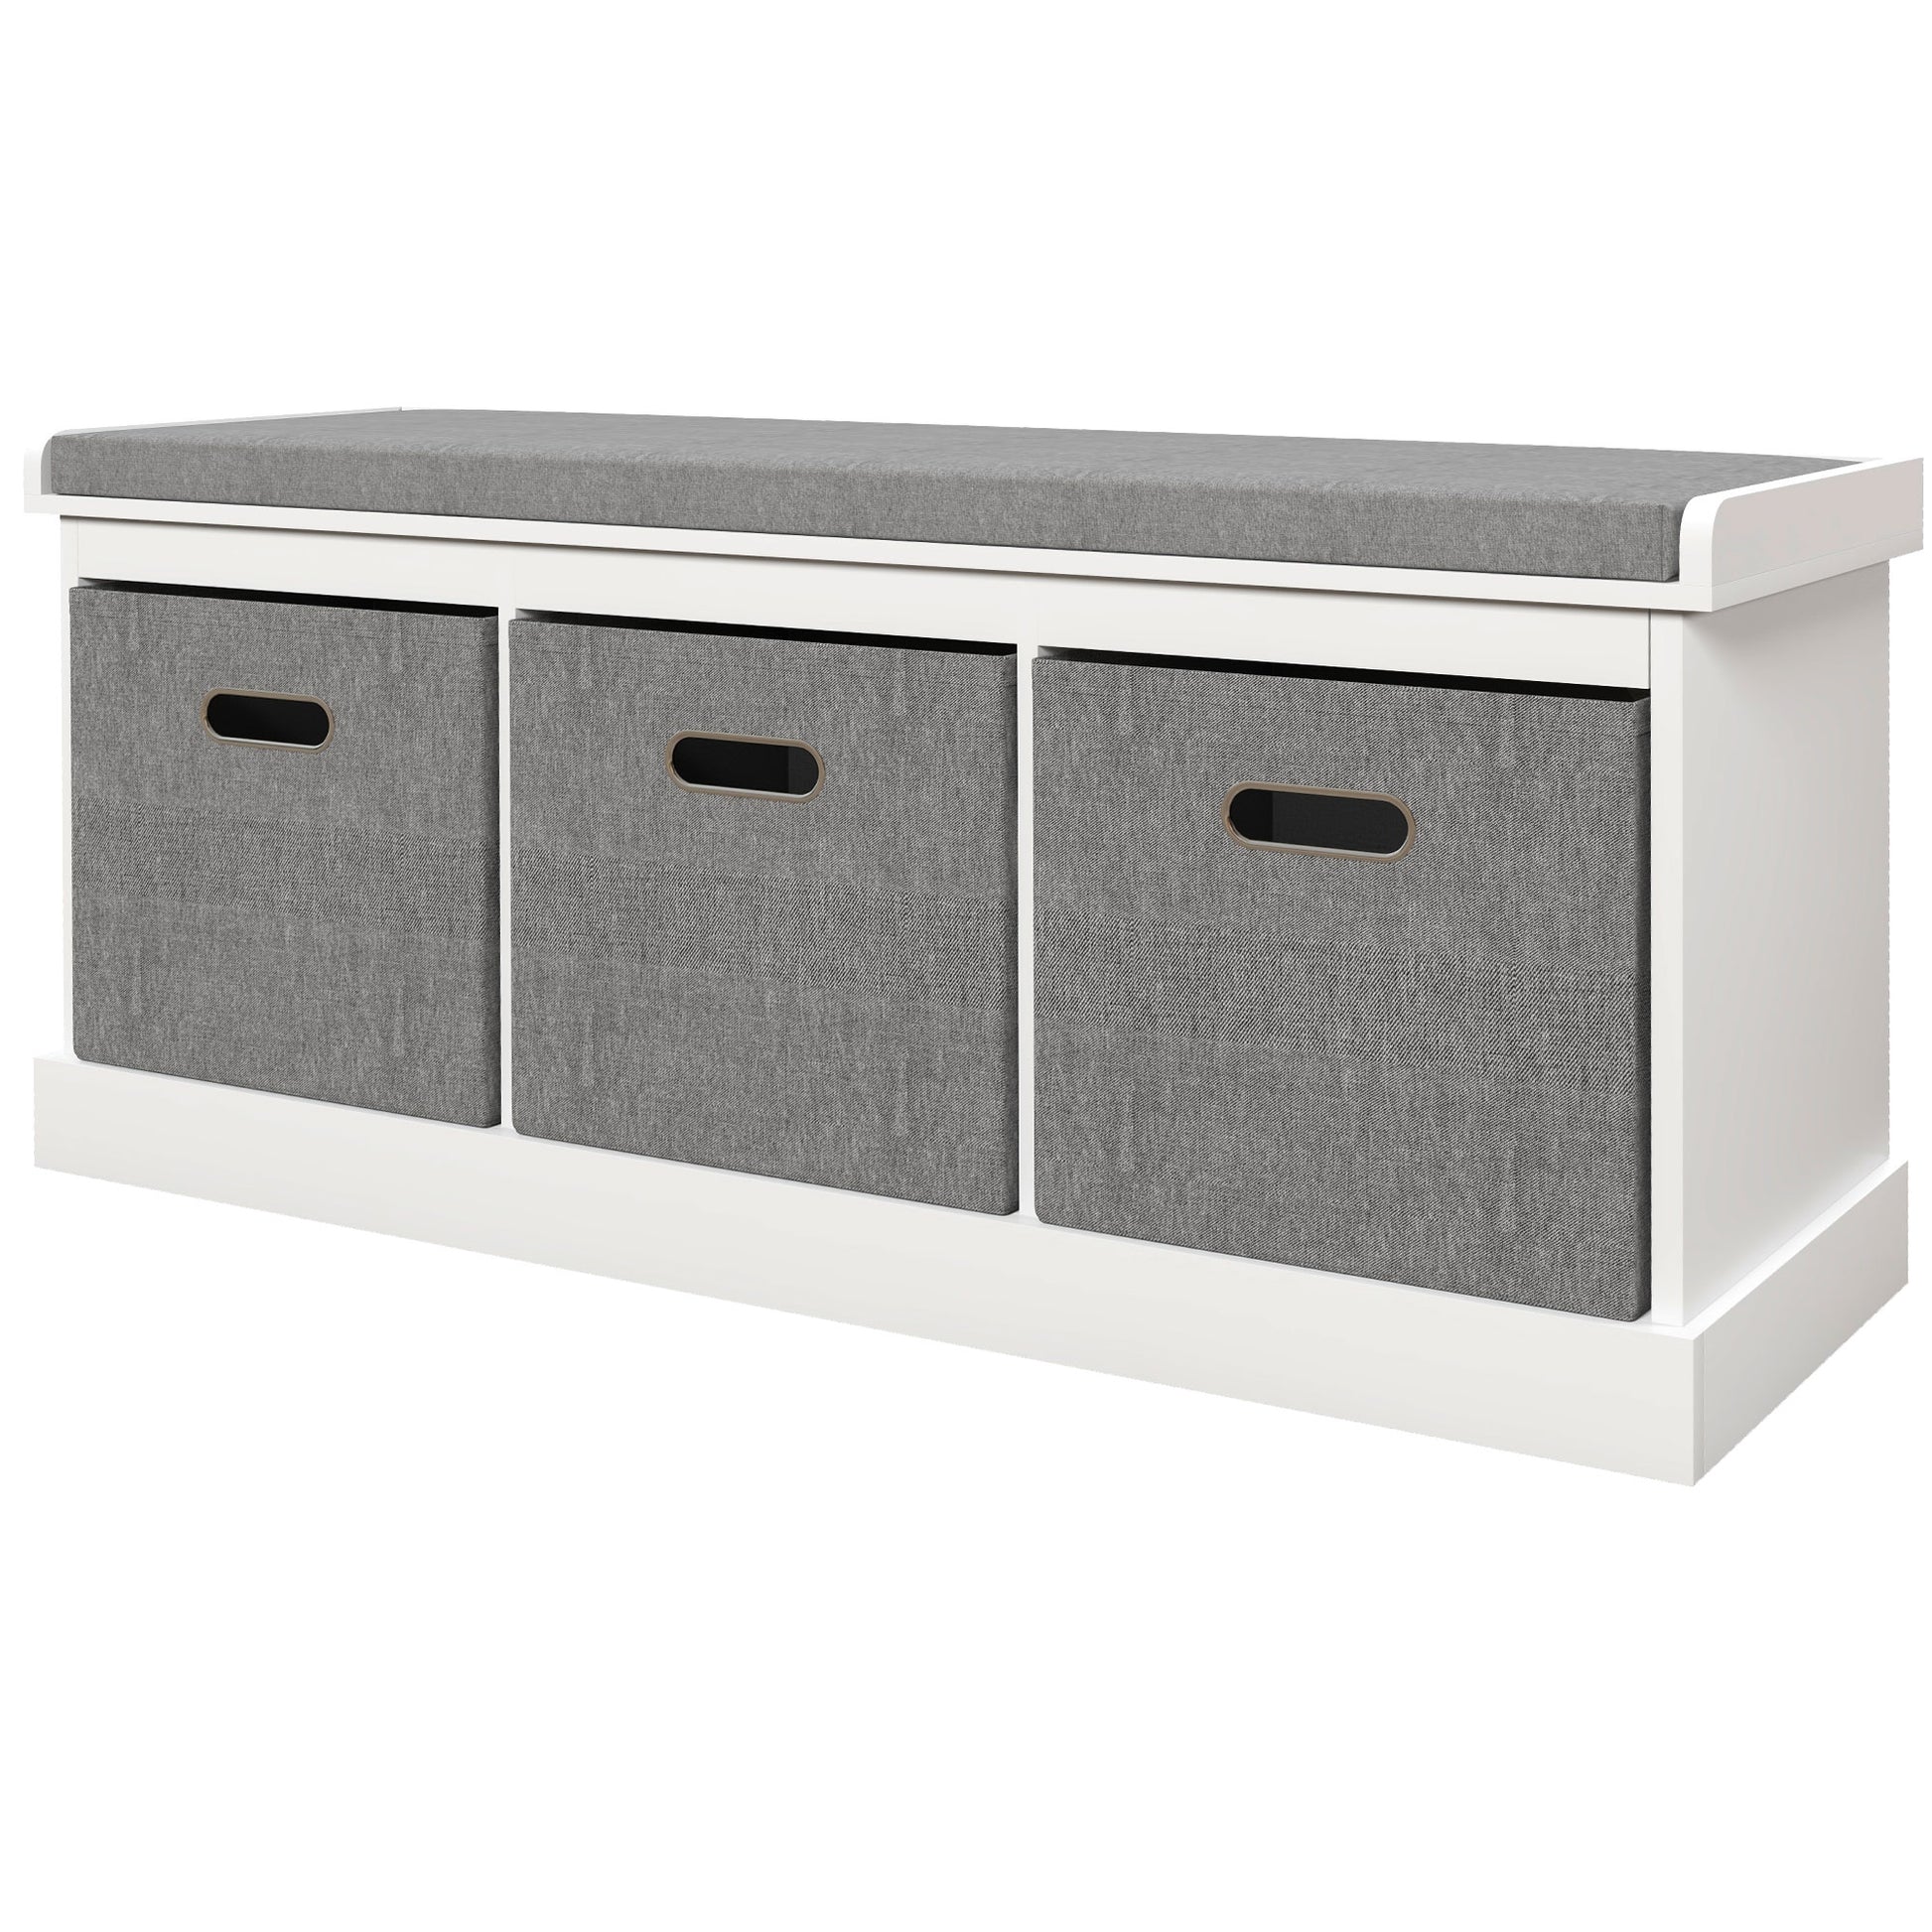 Shoe Storage Bench with Seat, Entryway Bench Seat with Cushion, 3 Fabric Drawers for Hallway, White at Gallery Canada